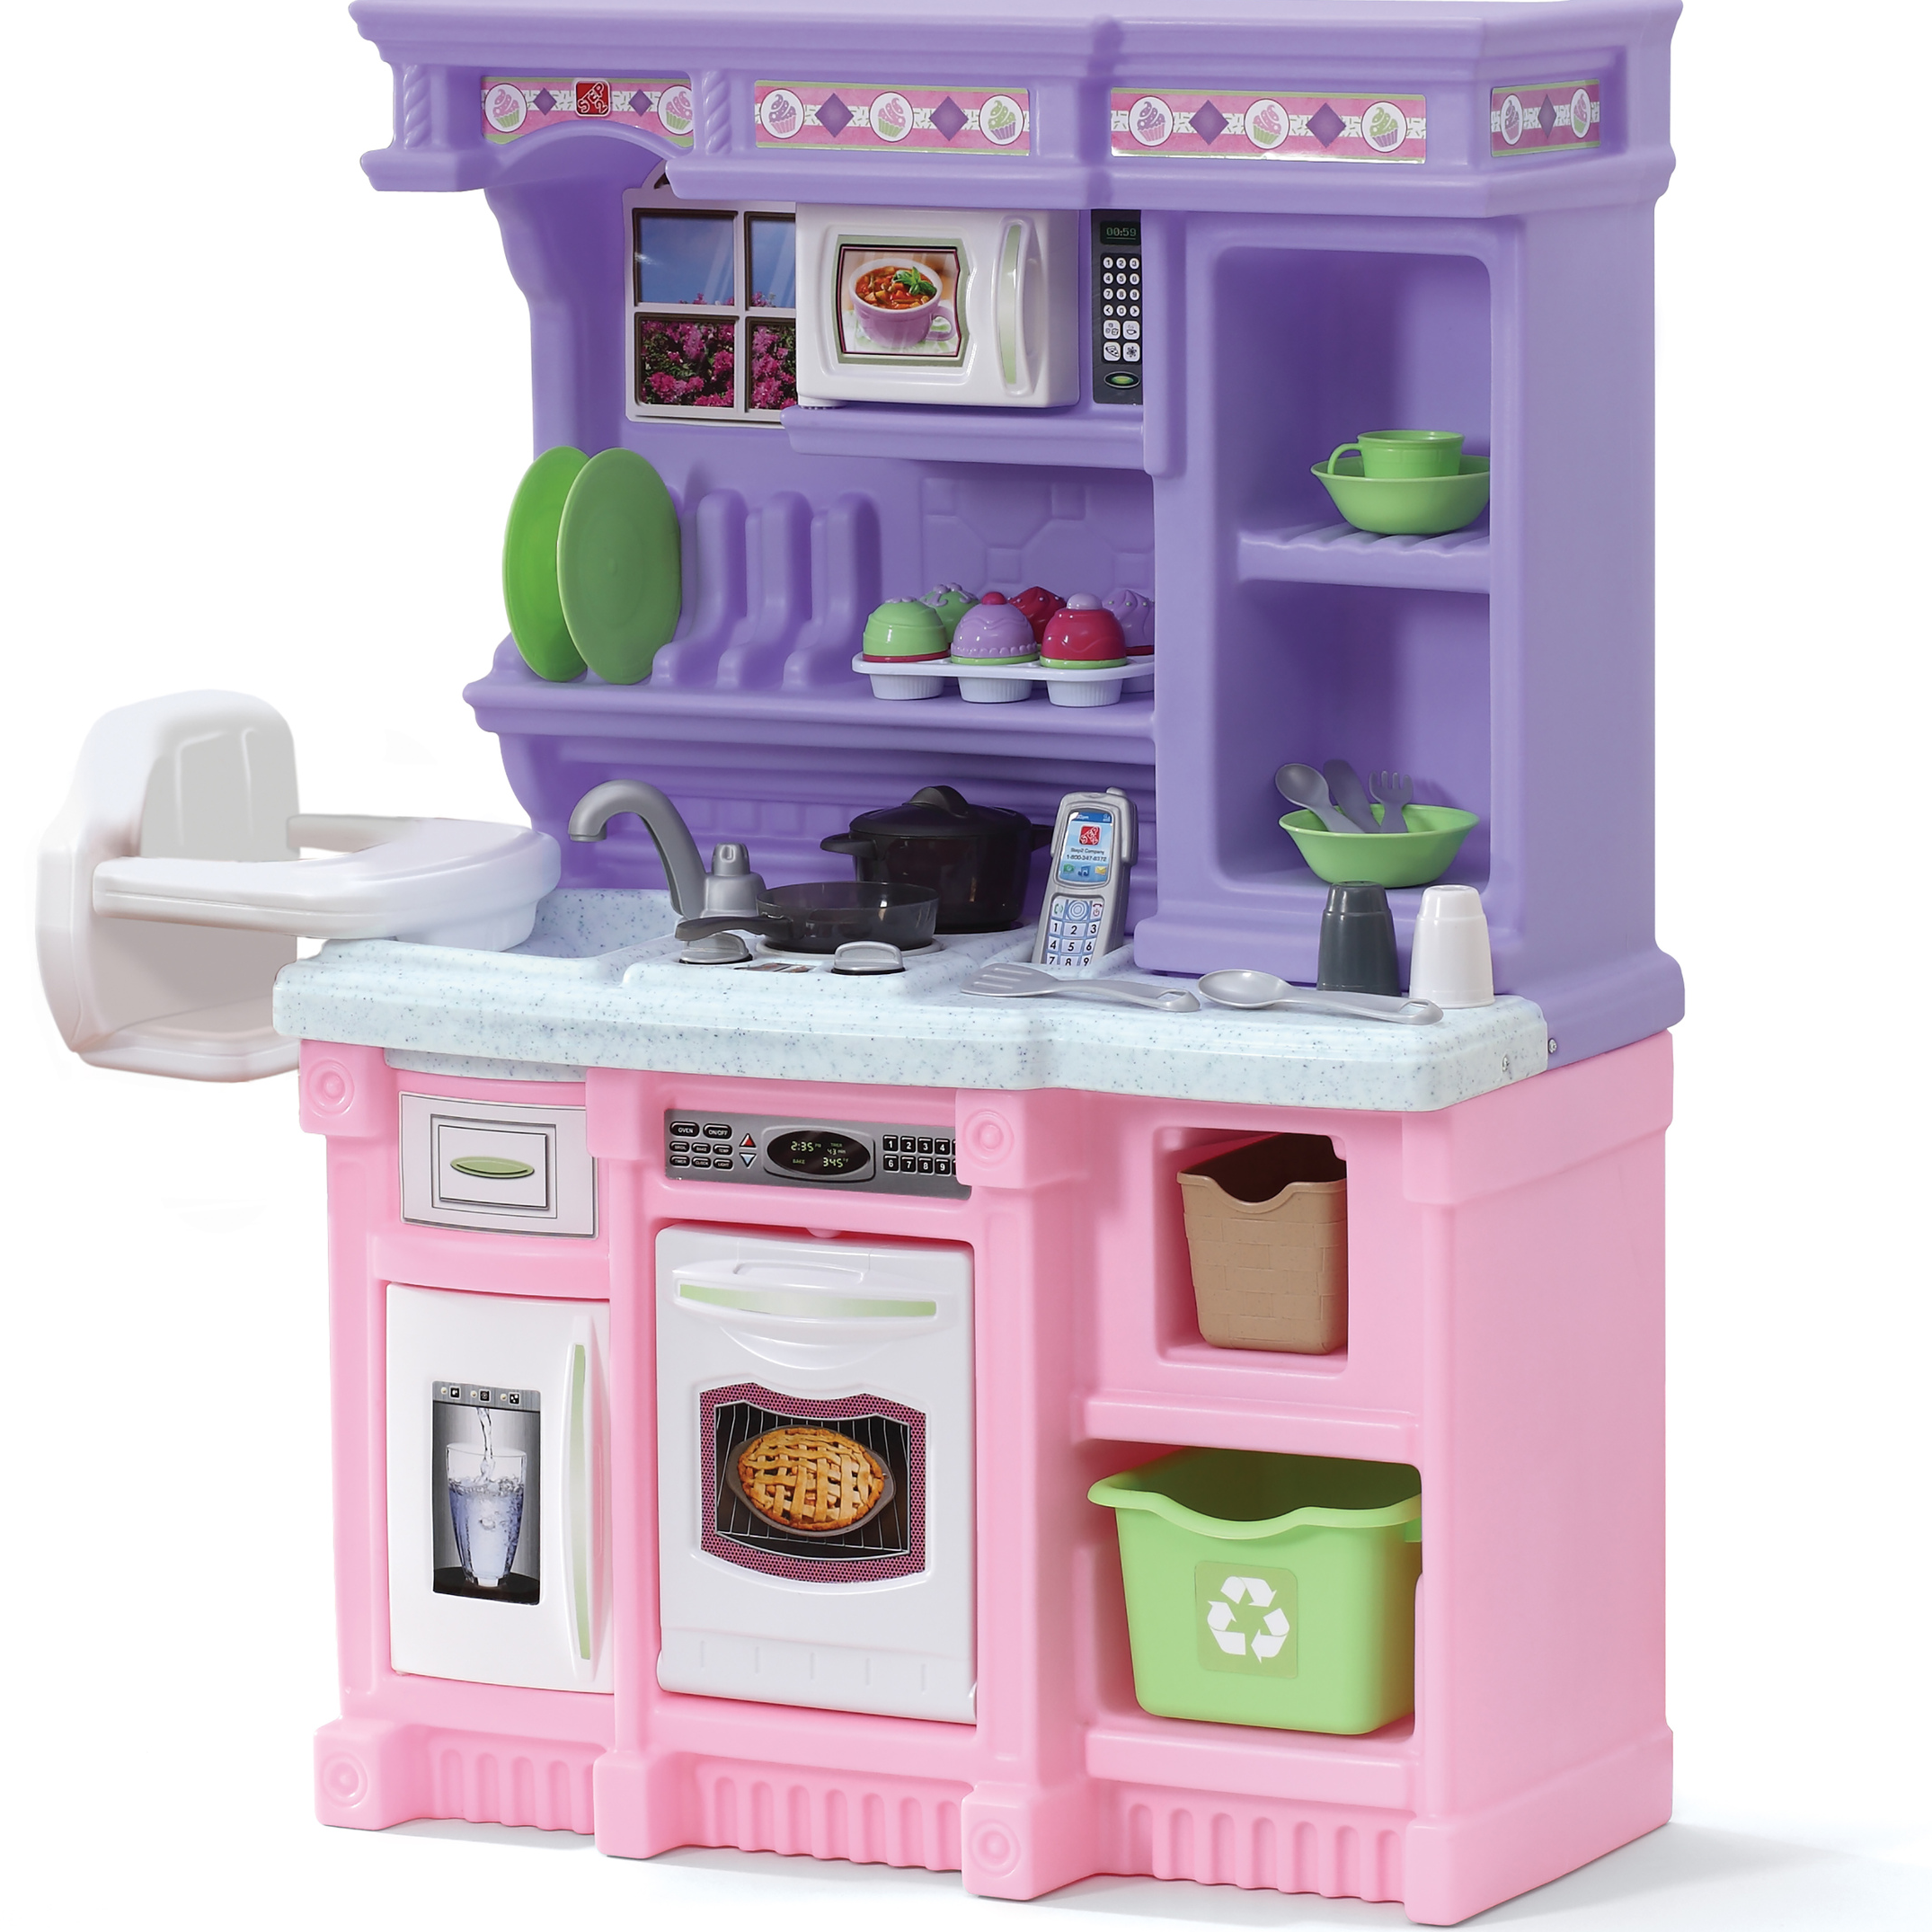 Step2 Little Bakers Pink Toddler Plastic Kitchen Playset with 30 Piece Play Set - image 1 of 17